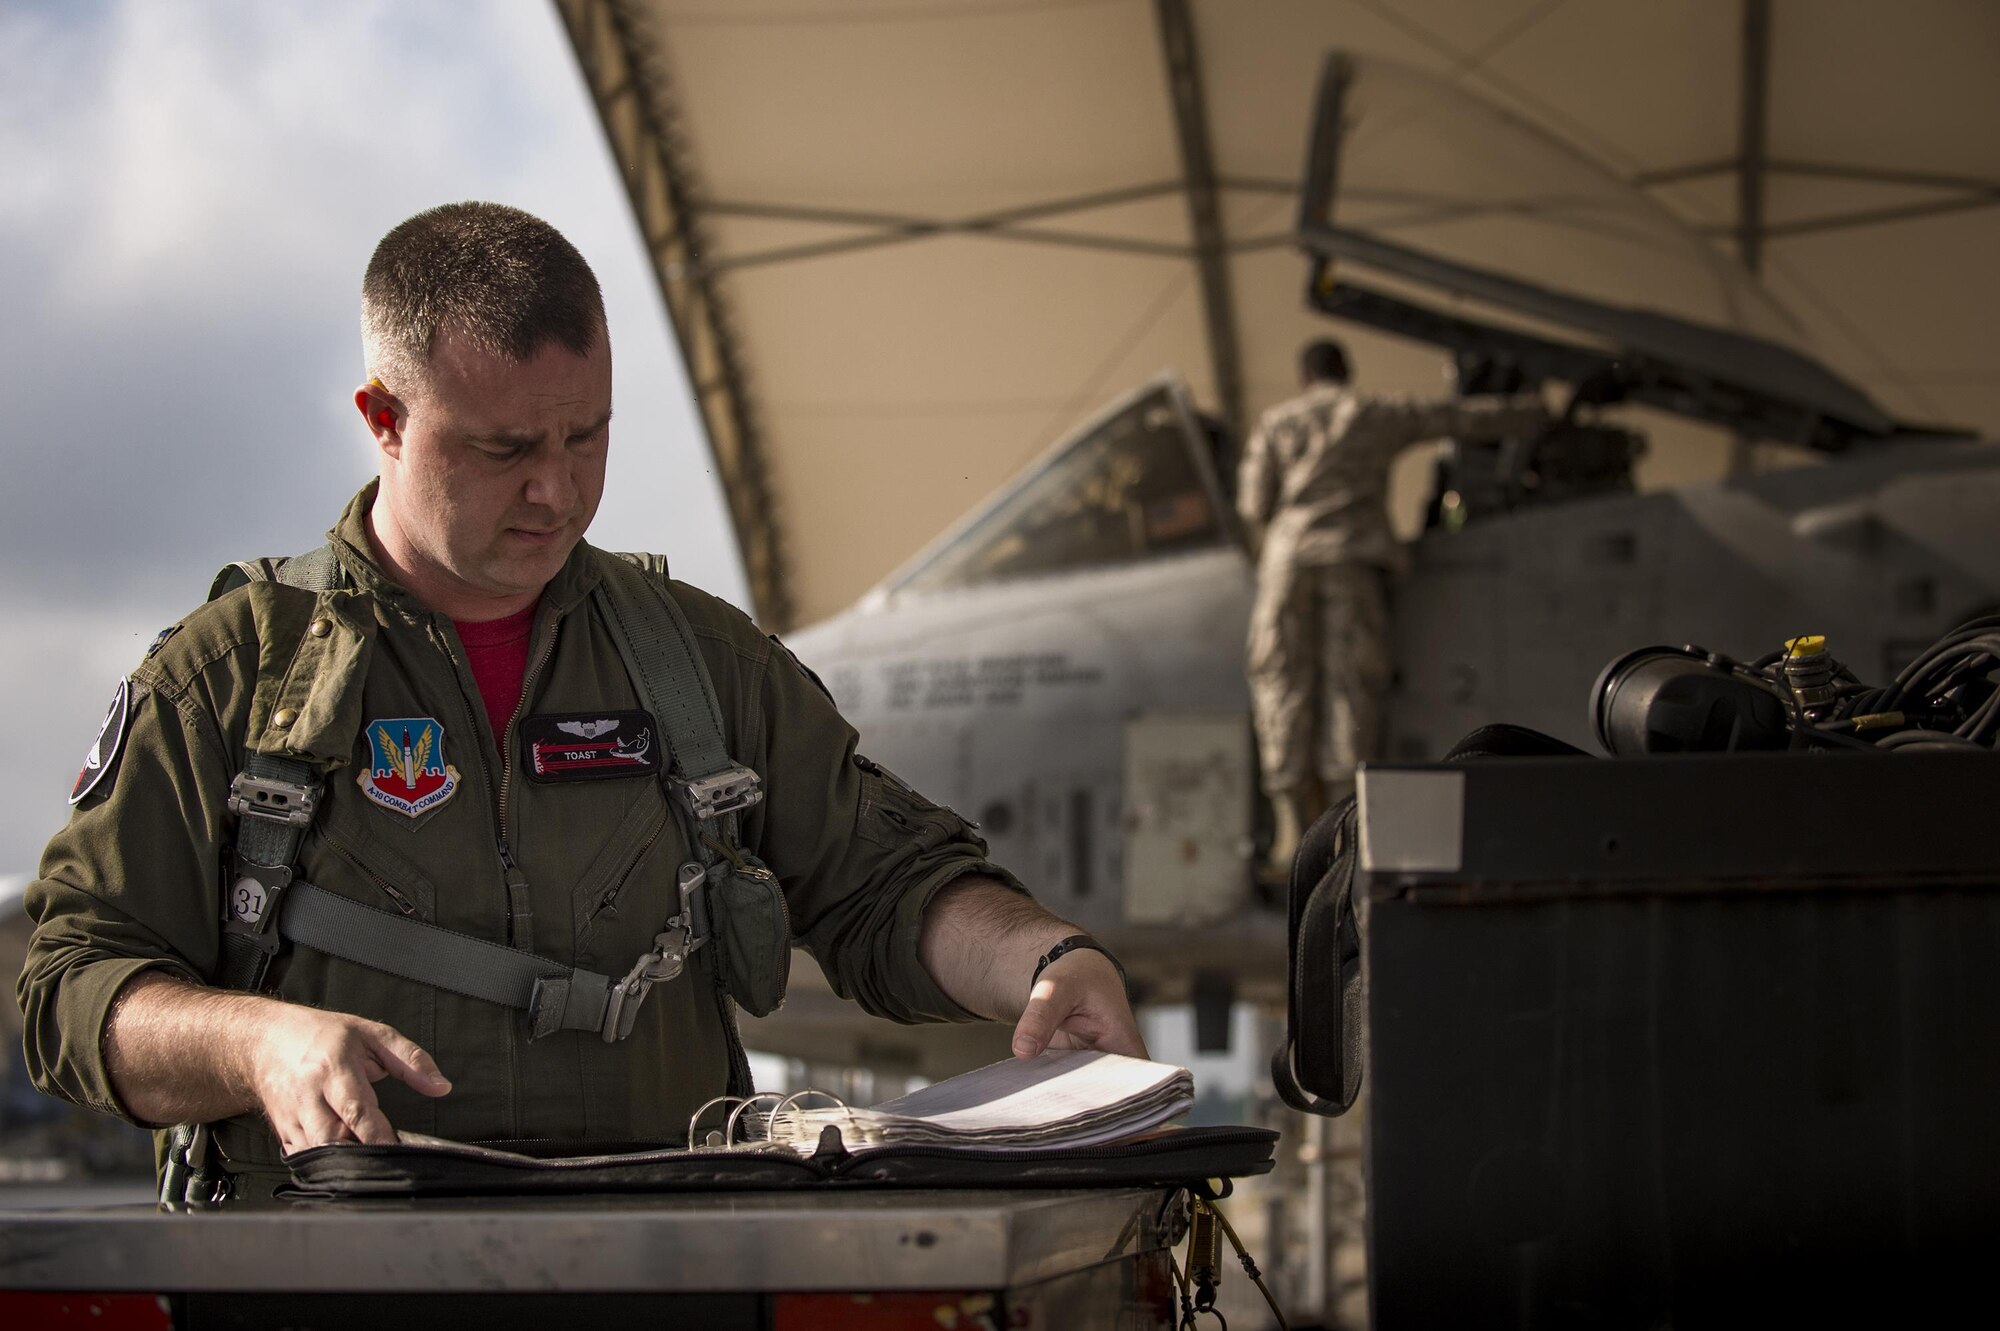 An A-10C Thunderbolt II pilot from the 75th Fighter Squadron fills out pre-flight inspection paperwork, April 28, 2017, at Moody Air Force Base, Ga. The 75th FS departed for Combat Hammer, an air-to-ground exercise hosted at Hill Air Force Base, Utah. The exercise is designed to collect and analyze data on the performance of precision weapons and measure their suitability for use in combat. (U.S. Air Force photo by Andrea Jenkins)